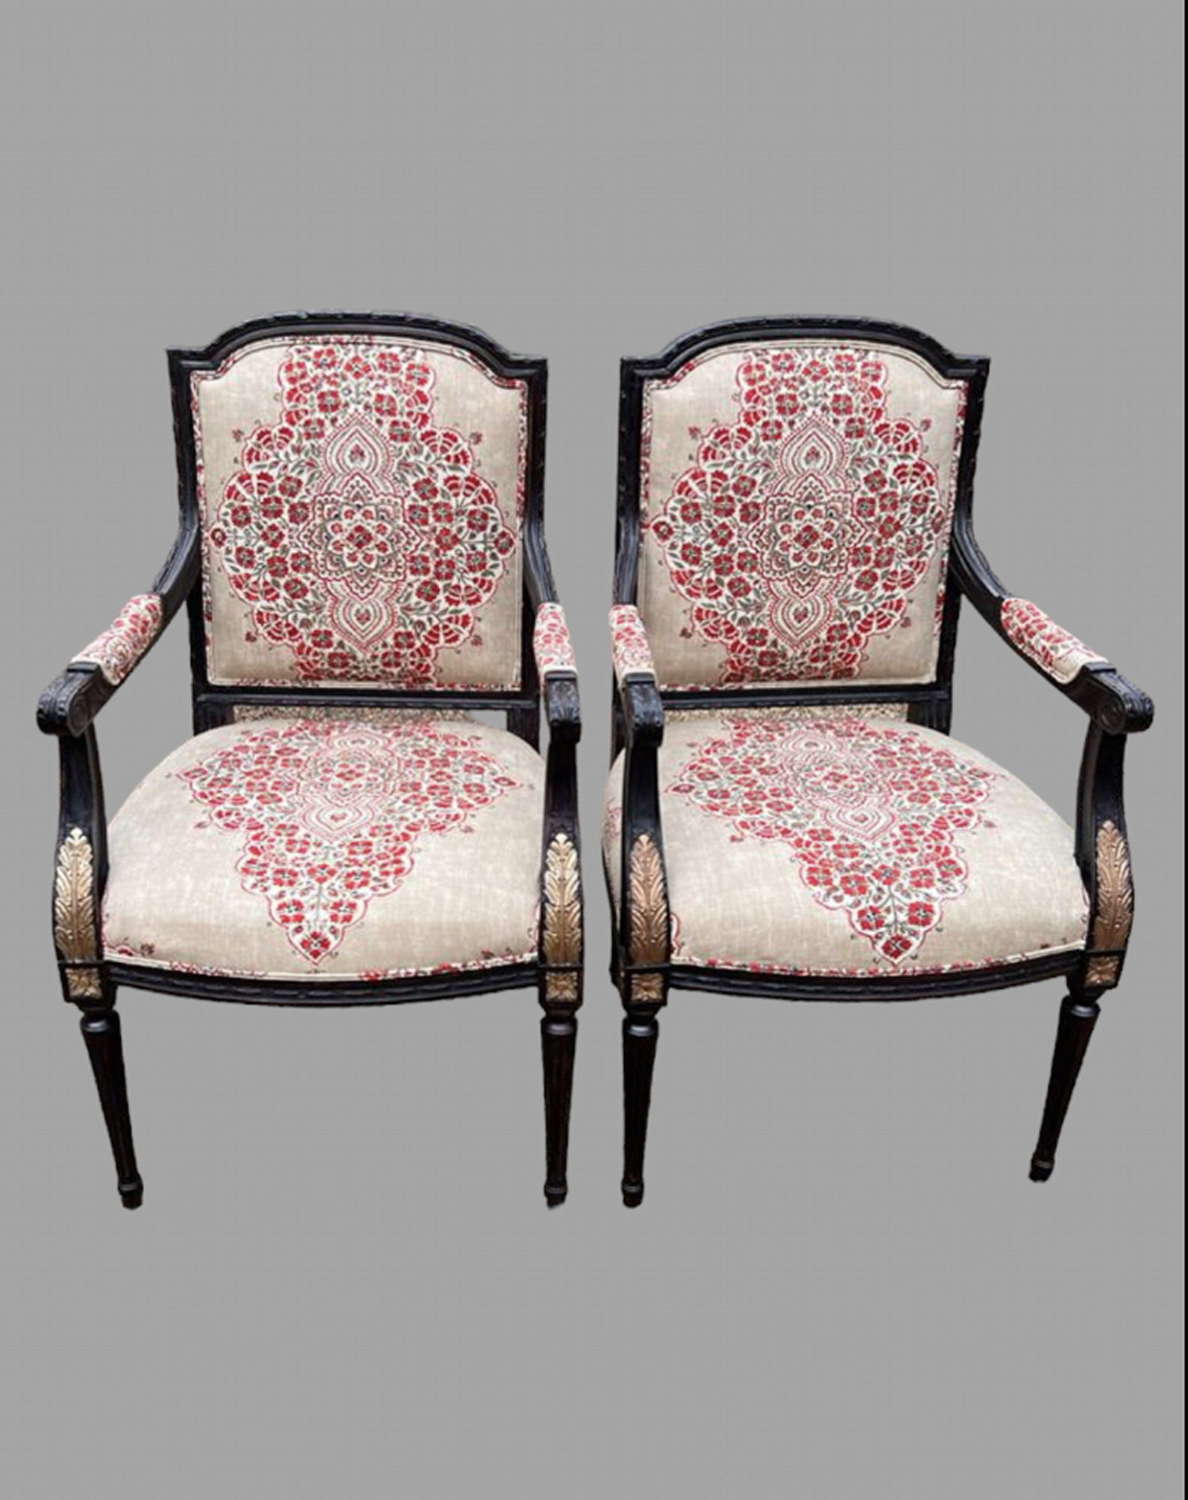 A Pair of Louis XV1 style Chairs